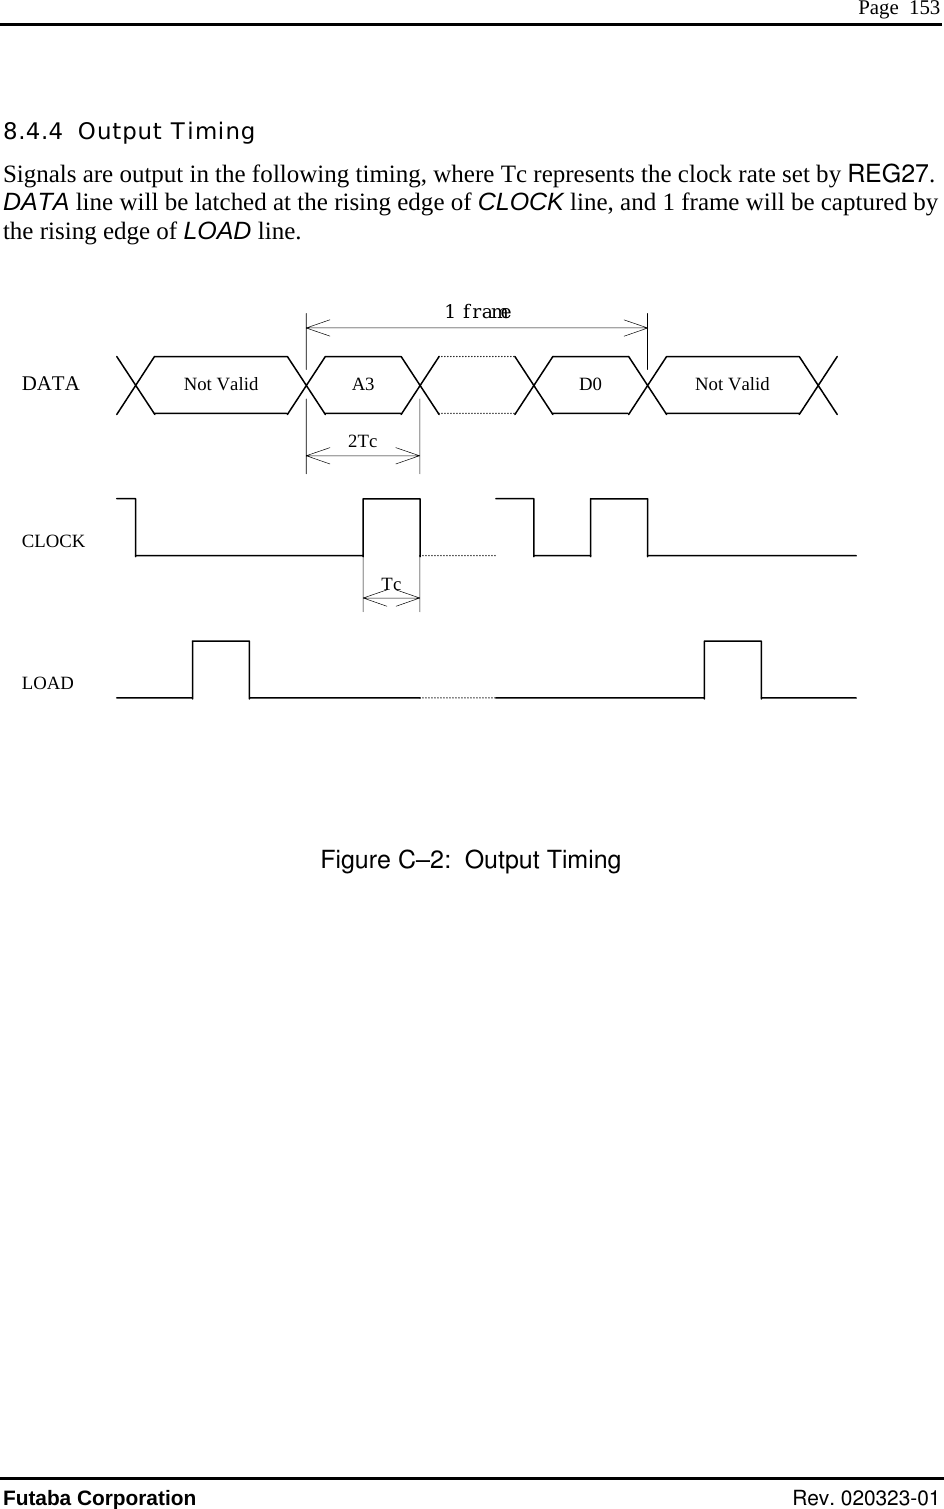  Page  153 8.4.4  Output Timing Signals are output in the following timing, where Tc represents the clock rate set by REG27. e of CLOCK line, and 1 frame will be captured by             Figure C–2:  Output Timing DATA line will be latched at the rising edgthe rising edge of LOAD line.         1 frame Not Valid Not Valid CLOCK LOAD A3 D0DATA 2Tc TcFutaba Corporation Rev. 020323-01 